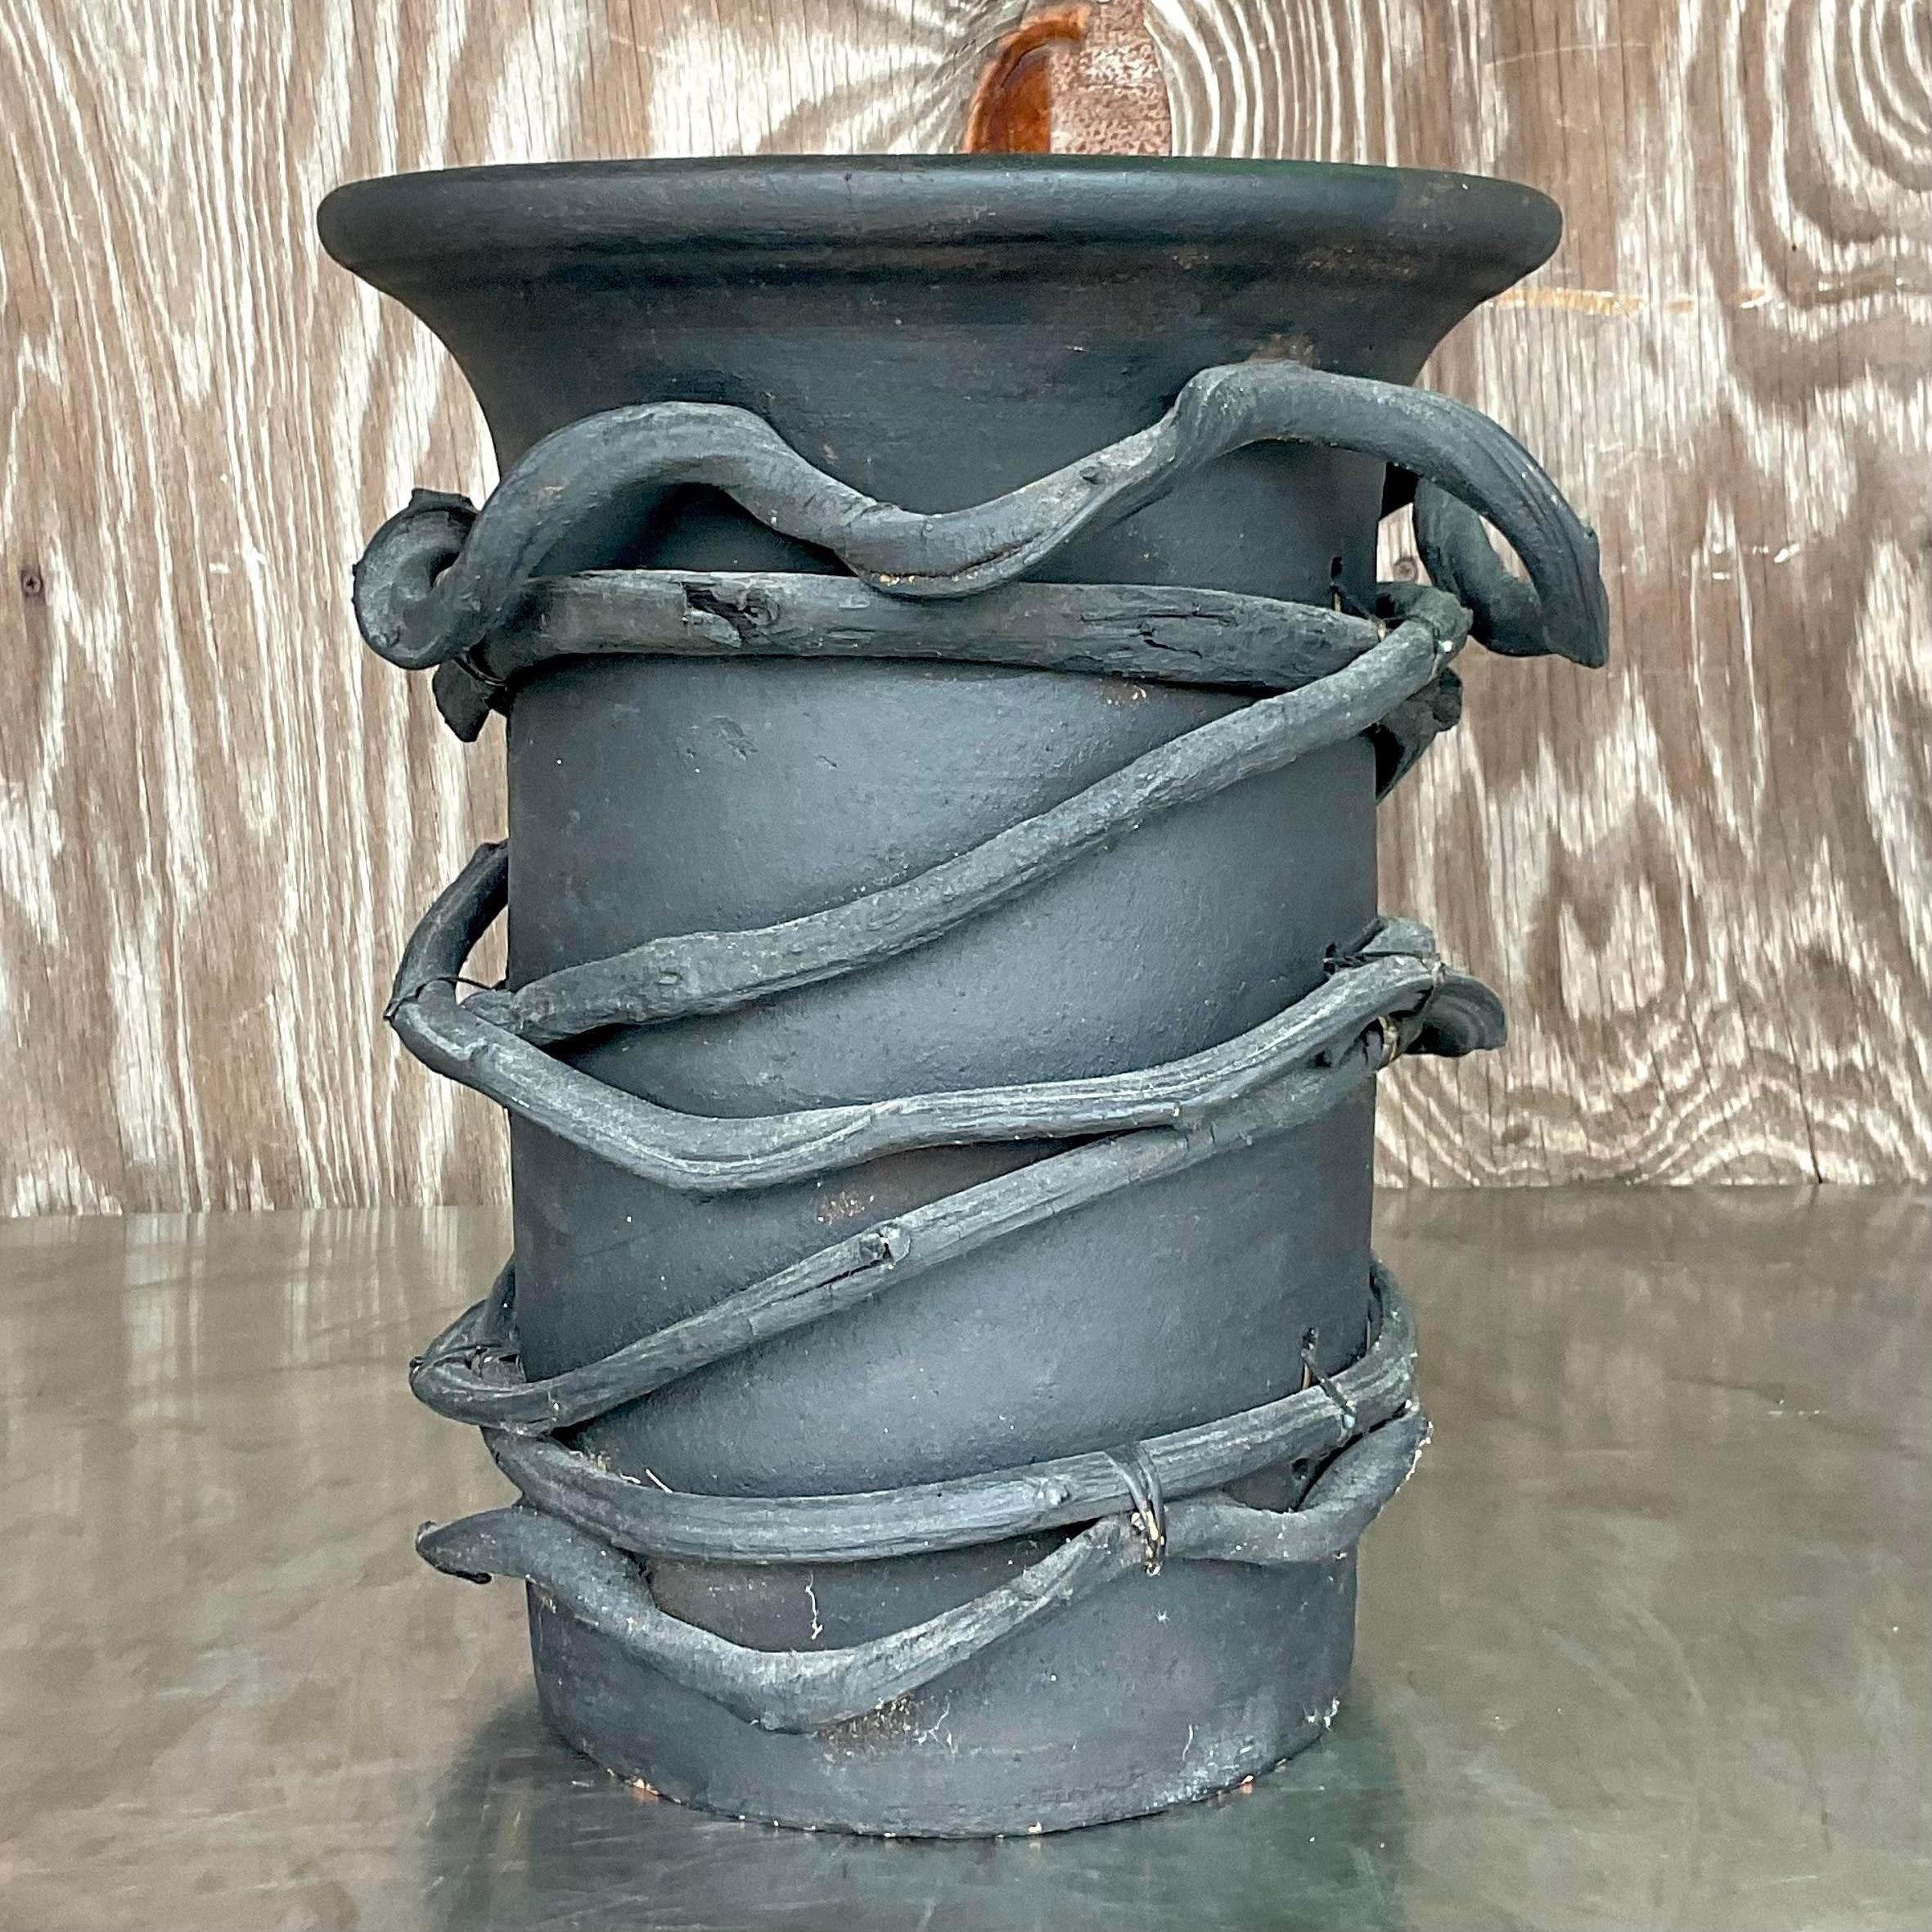 A fantastic vintage Boho vase. A chic hand made studio pottery vase wrapped in a heavy grape vine. Both are roughly painted black for a dramatic effect. Acquired from a Palm Beach estate.